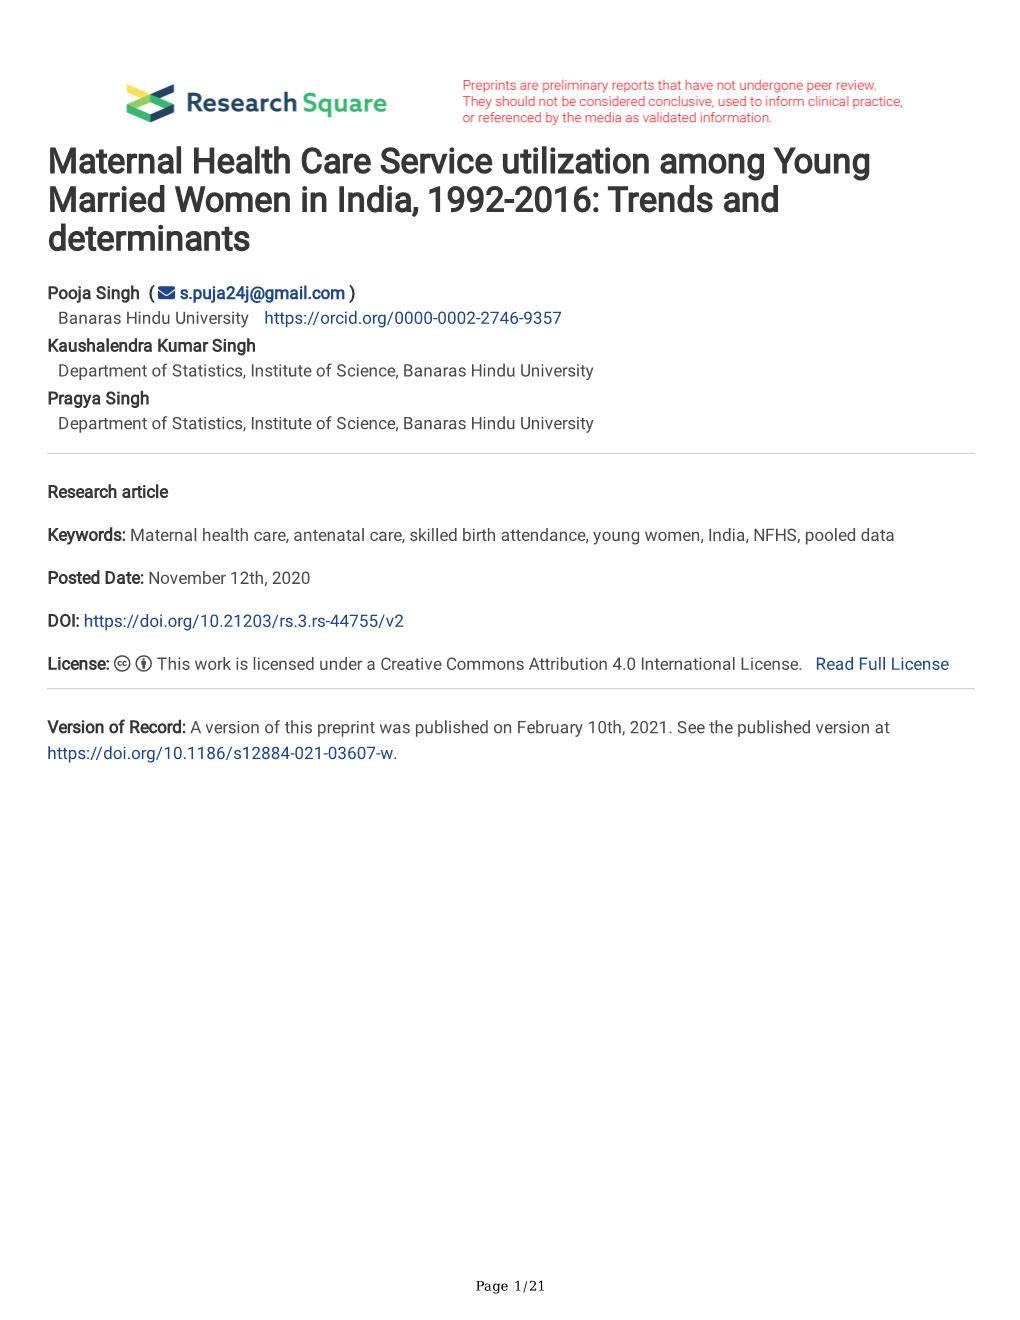 Maternal Health Care Service Utilization Among Young Married Women in India, 1992-2016: Trends and Determinants